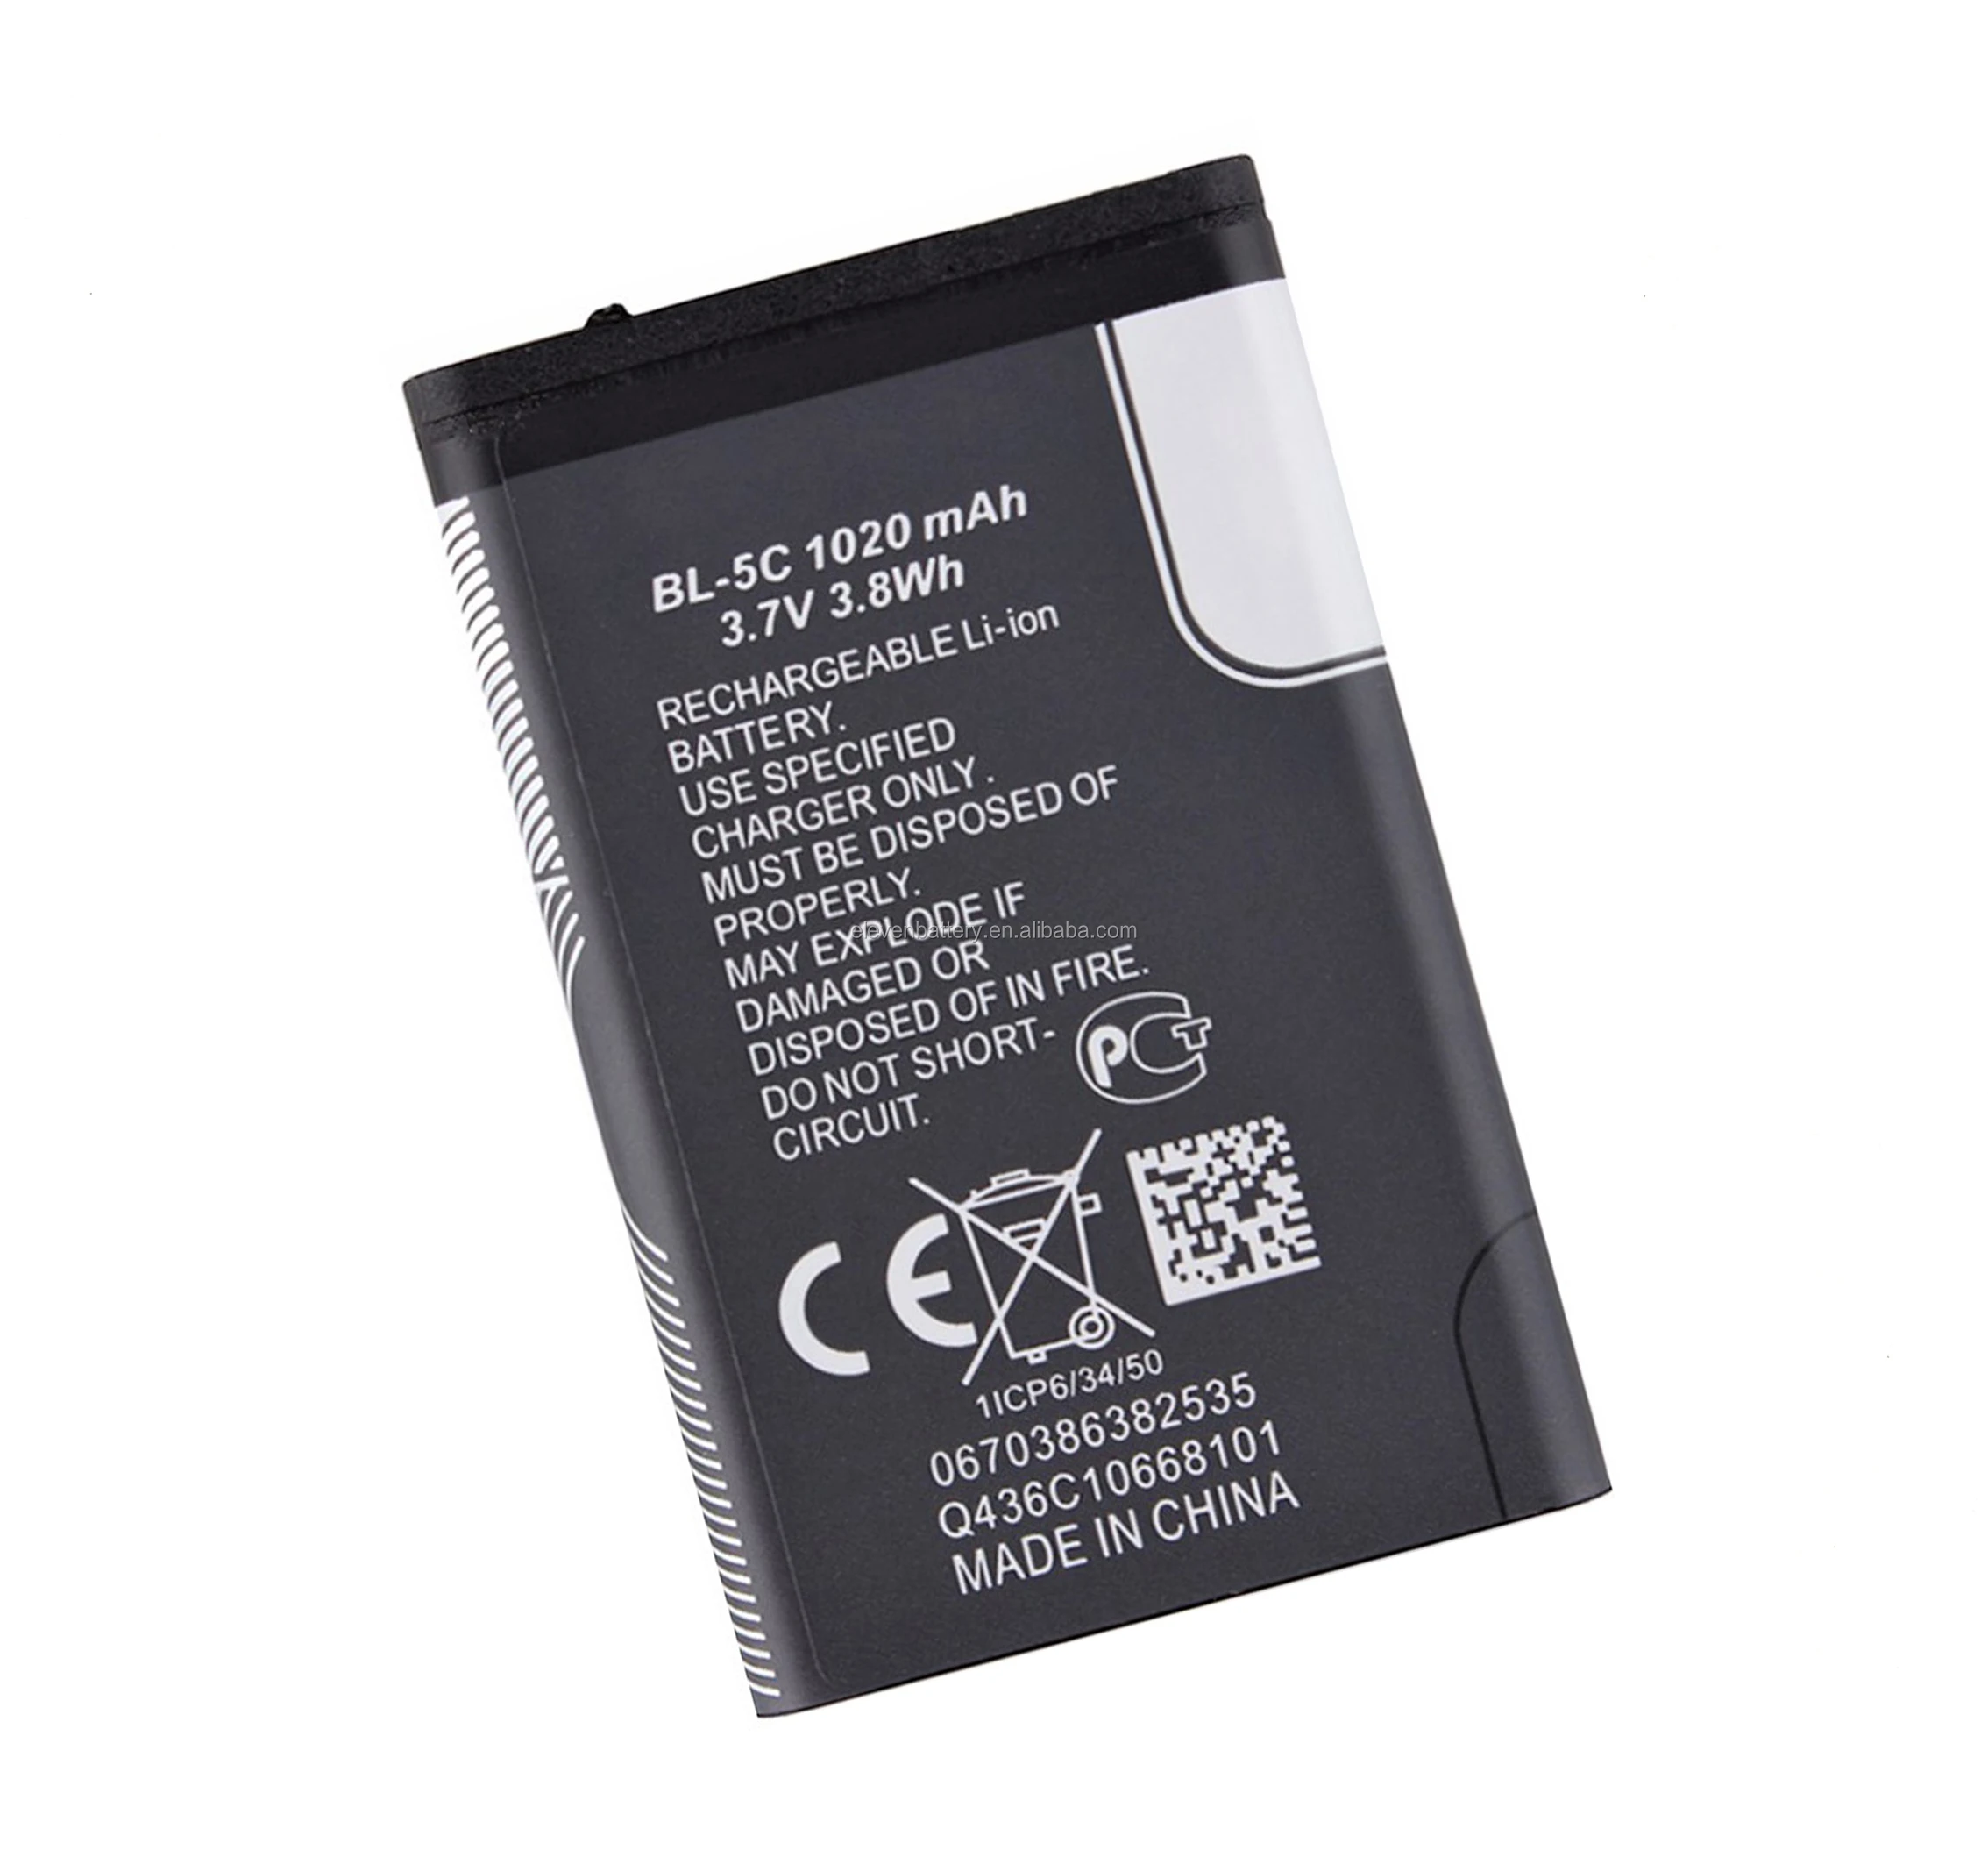 Bl-5c Battery For Nokia Mobile Battery Bl 5c 105 106 For Nokia Original  Battery Price - Buy For Nokia Mobile Battery,Phone Battery,Bl-5c Battery  For Nokia Product on Alibaba.com